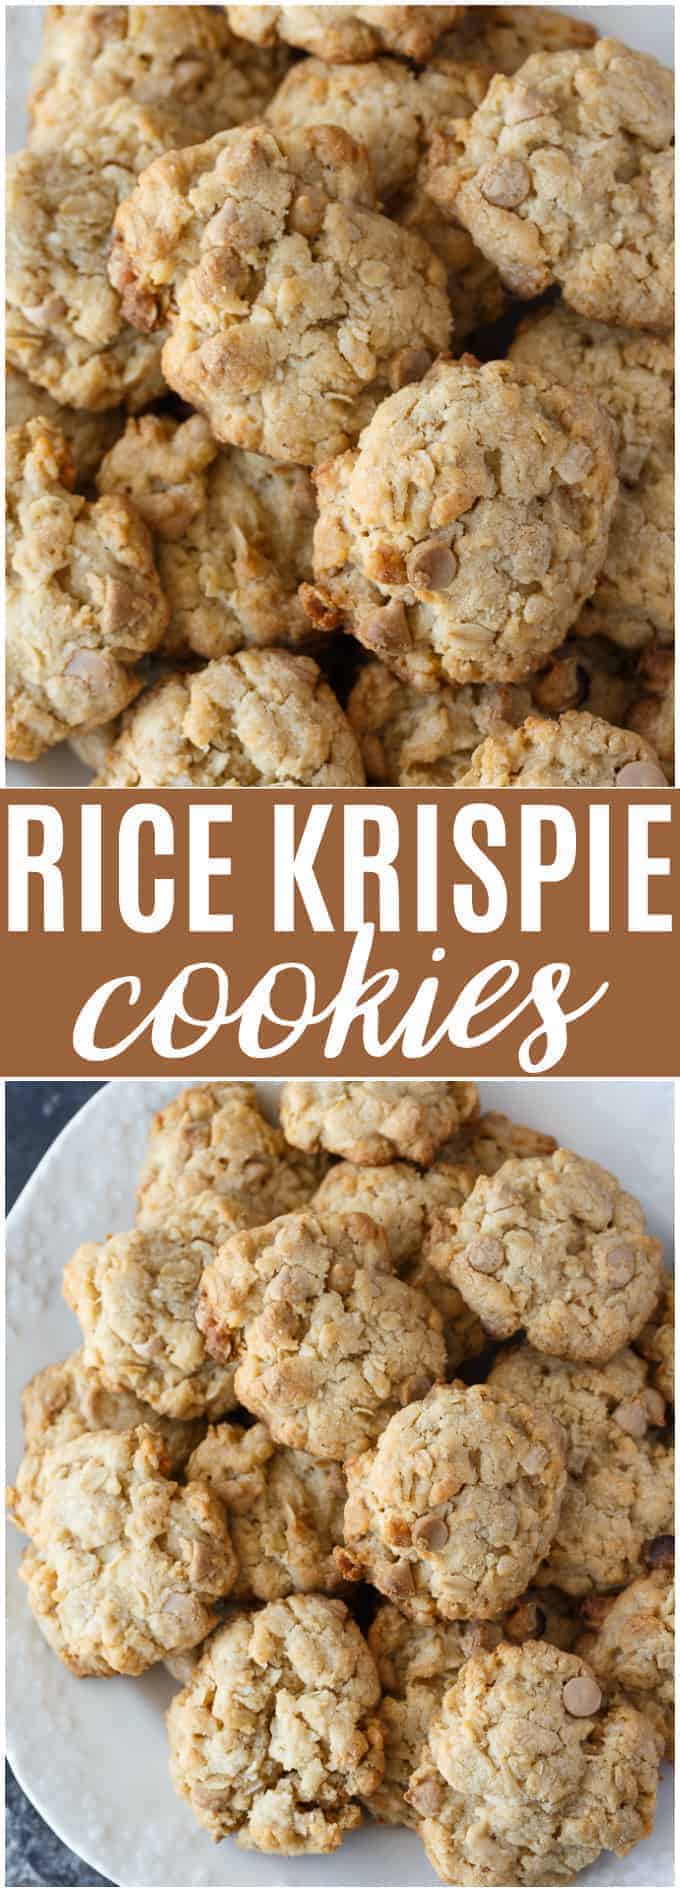 Rice Krispie Cookies - Packed full of YUM! This easy cookie recipe is made with Rice Krispies, coconut, oats and salted caramel chips.